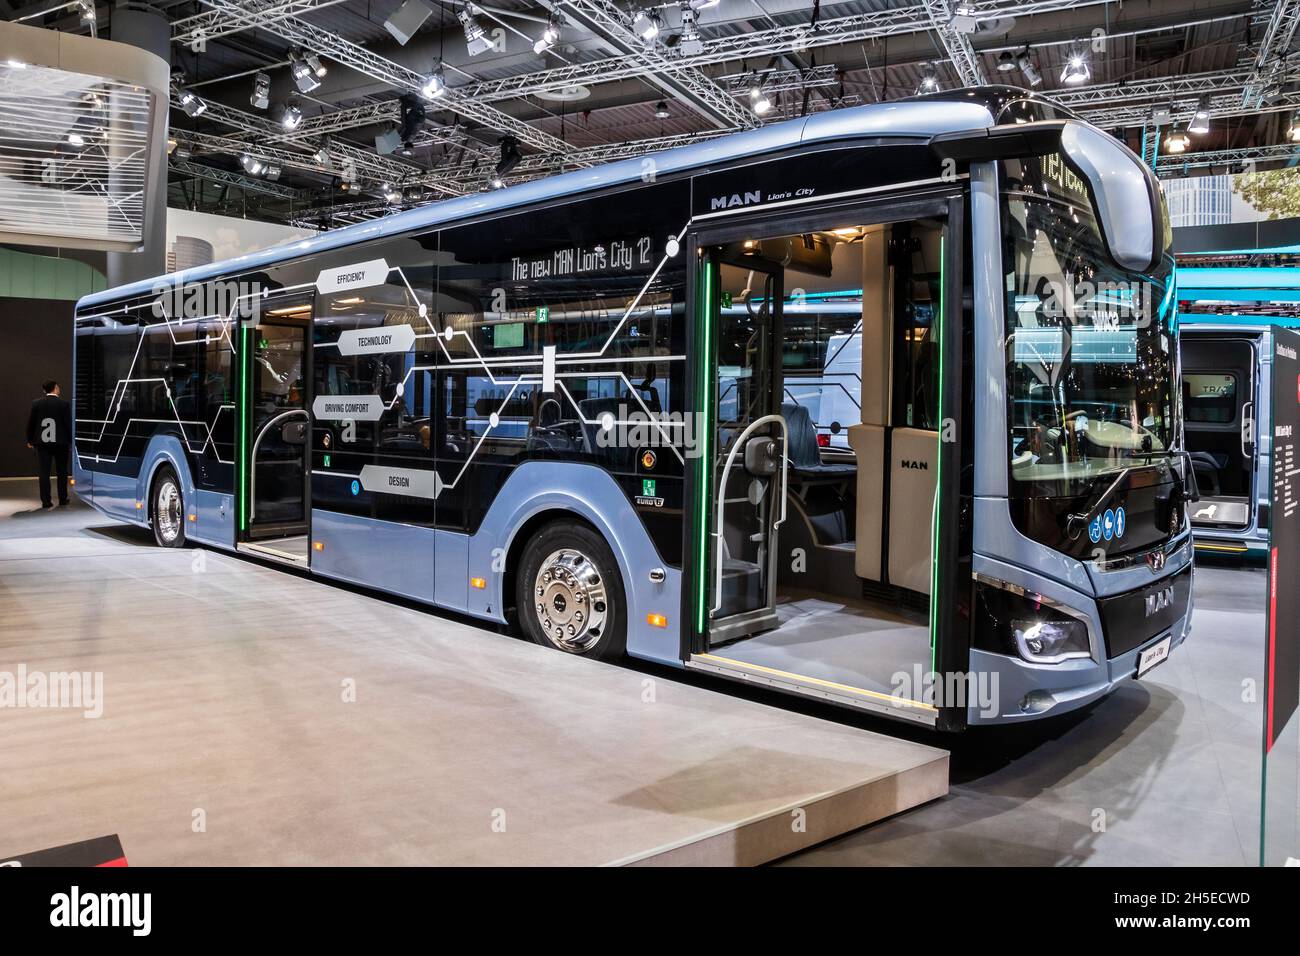 MAN Lion's city public bus showcased at the Hannover IAA Commercial Vehicles Motor Show. Germany - September 27, 2018. Stock Photo